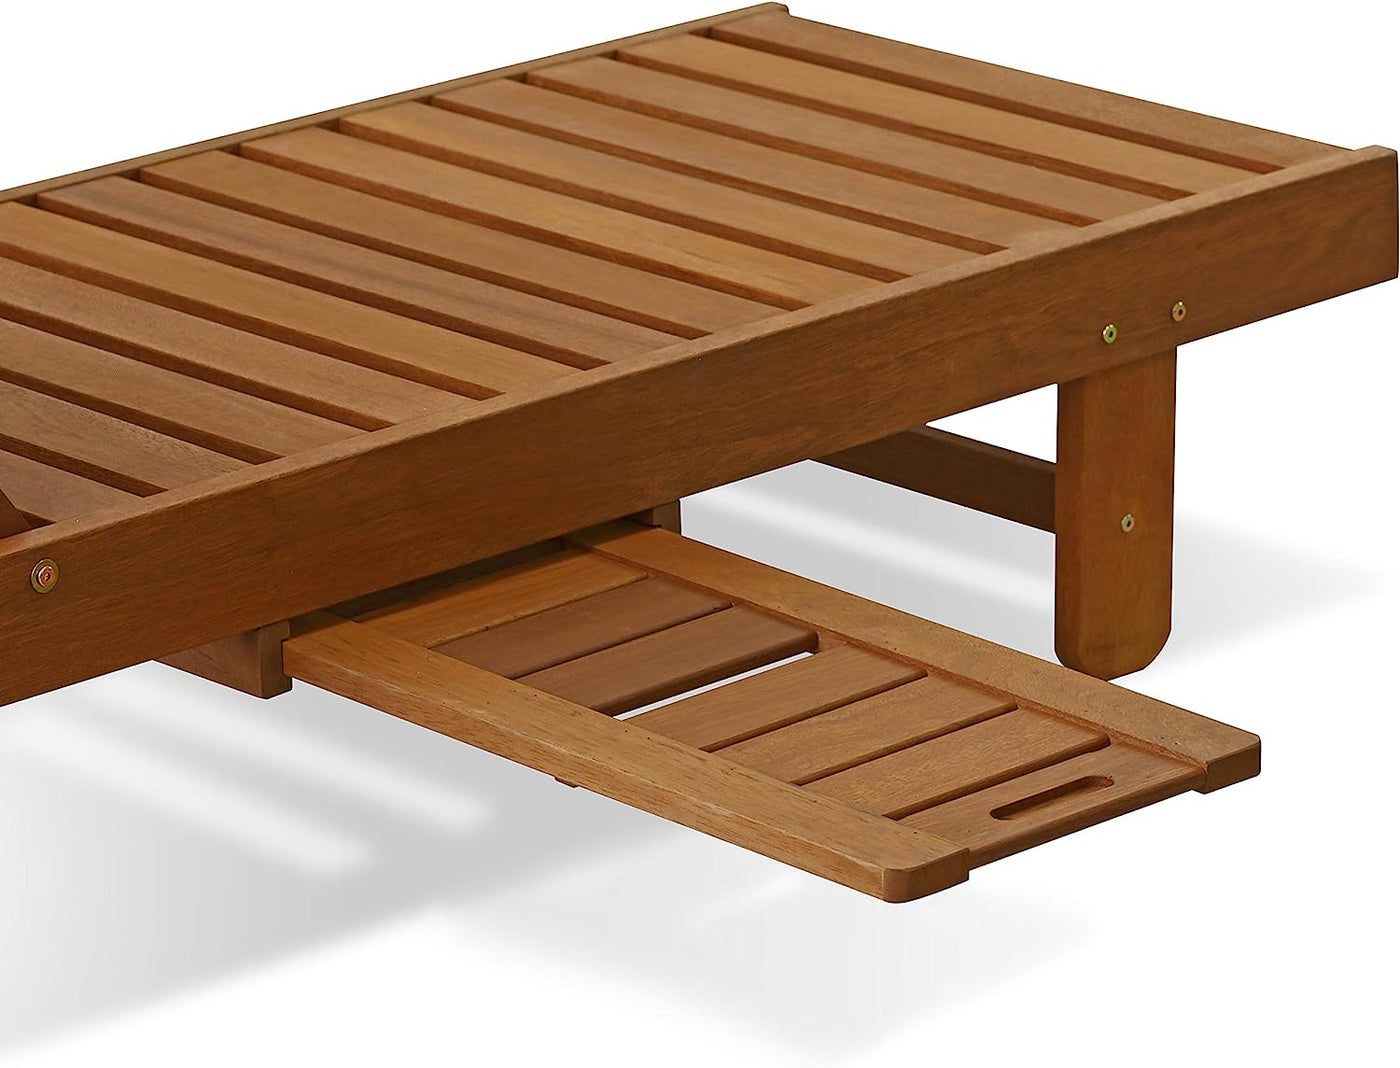 Outdoor Hardwood Patio Furniture Sun Lounger with Tray in Teak Oil, Natural - $100